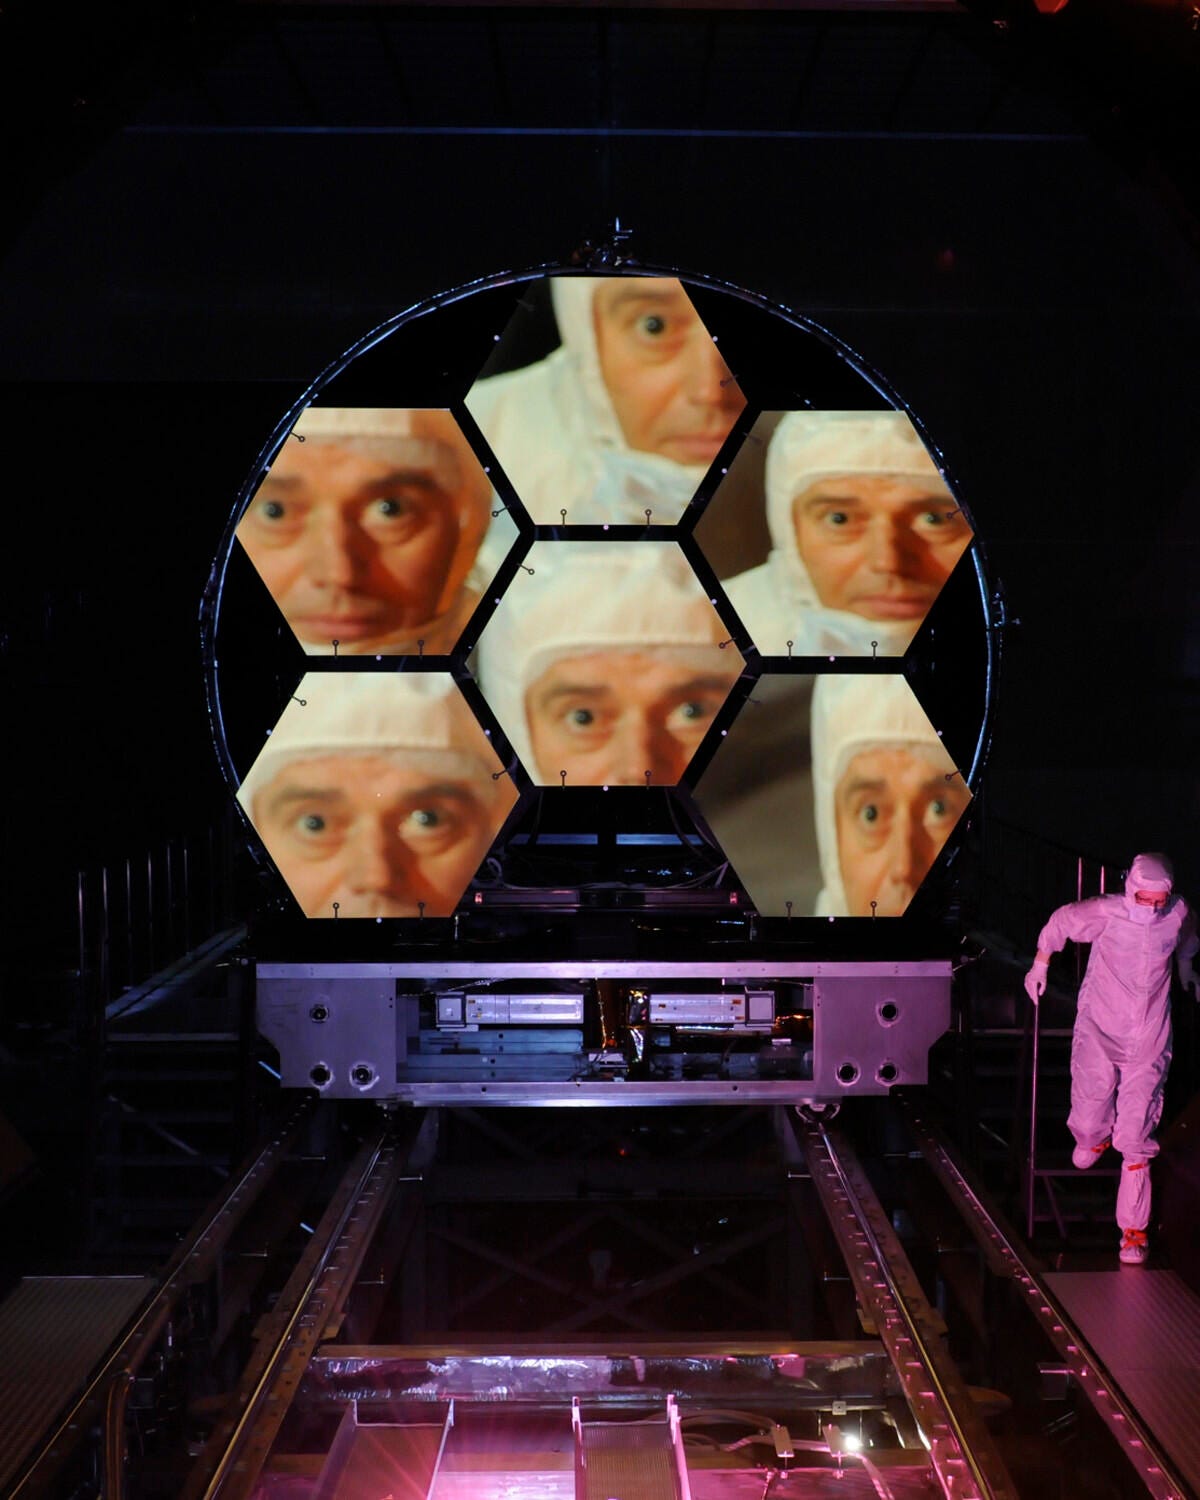 One of JWST's scientists is seen reflected in the telescope's mirrors.